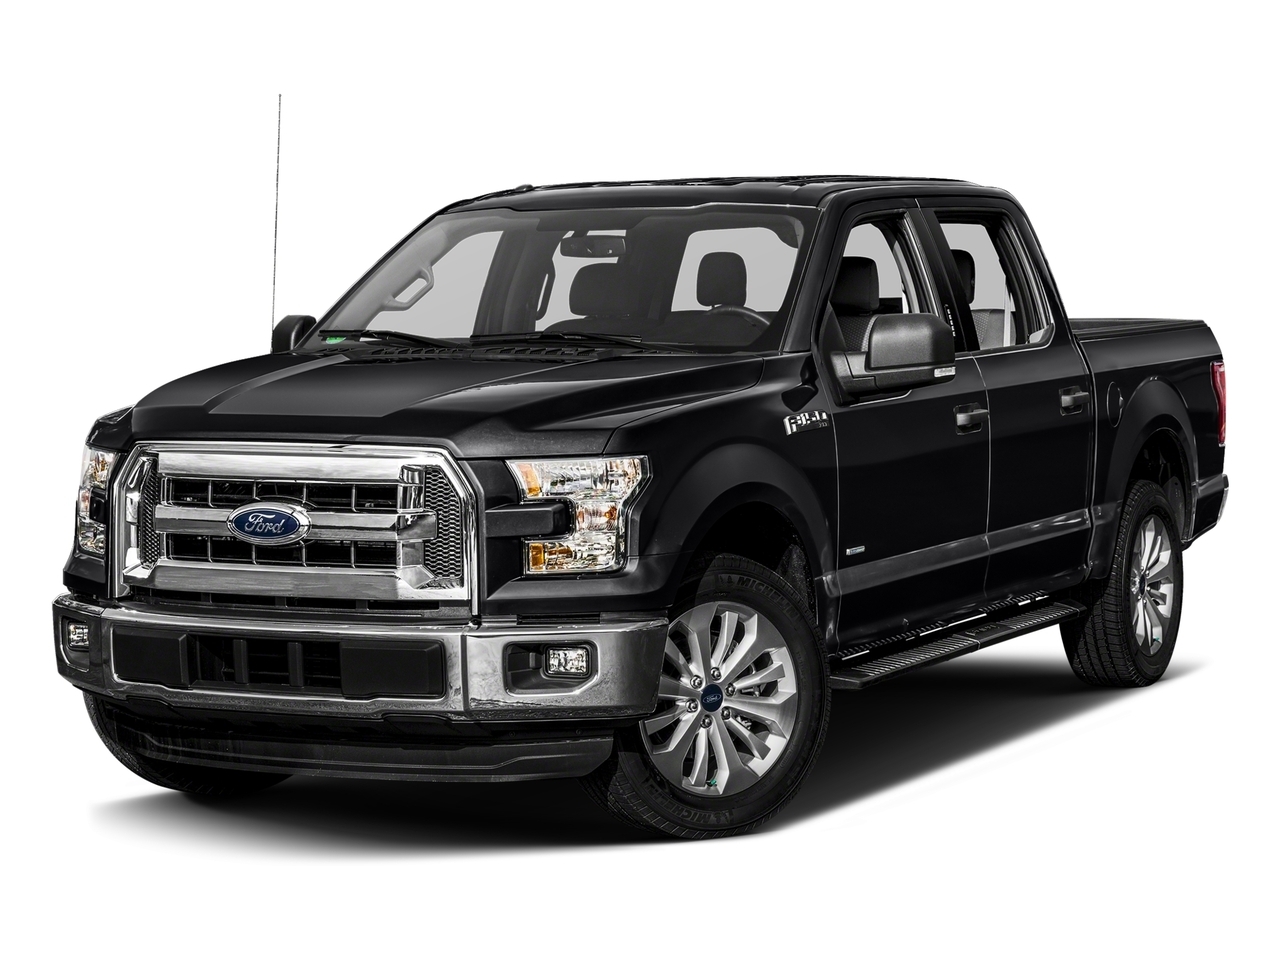 2017 Ford F-150 XLT - 4WD | SUPERCREW CAB | 157" | TOW HOOK